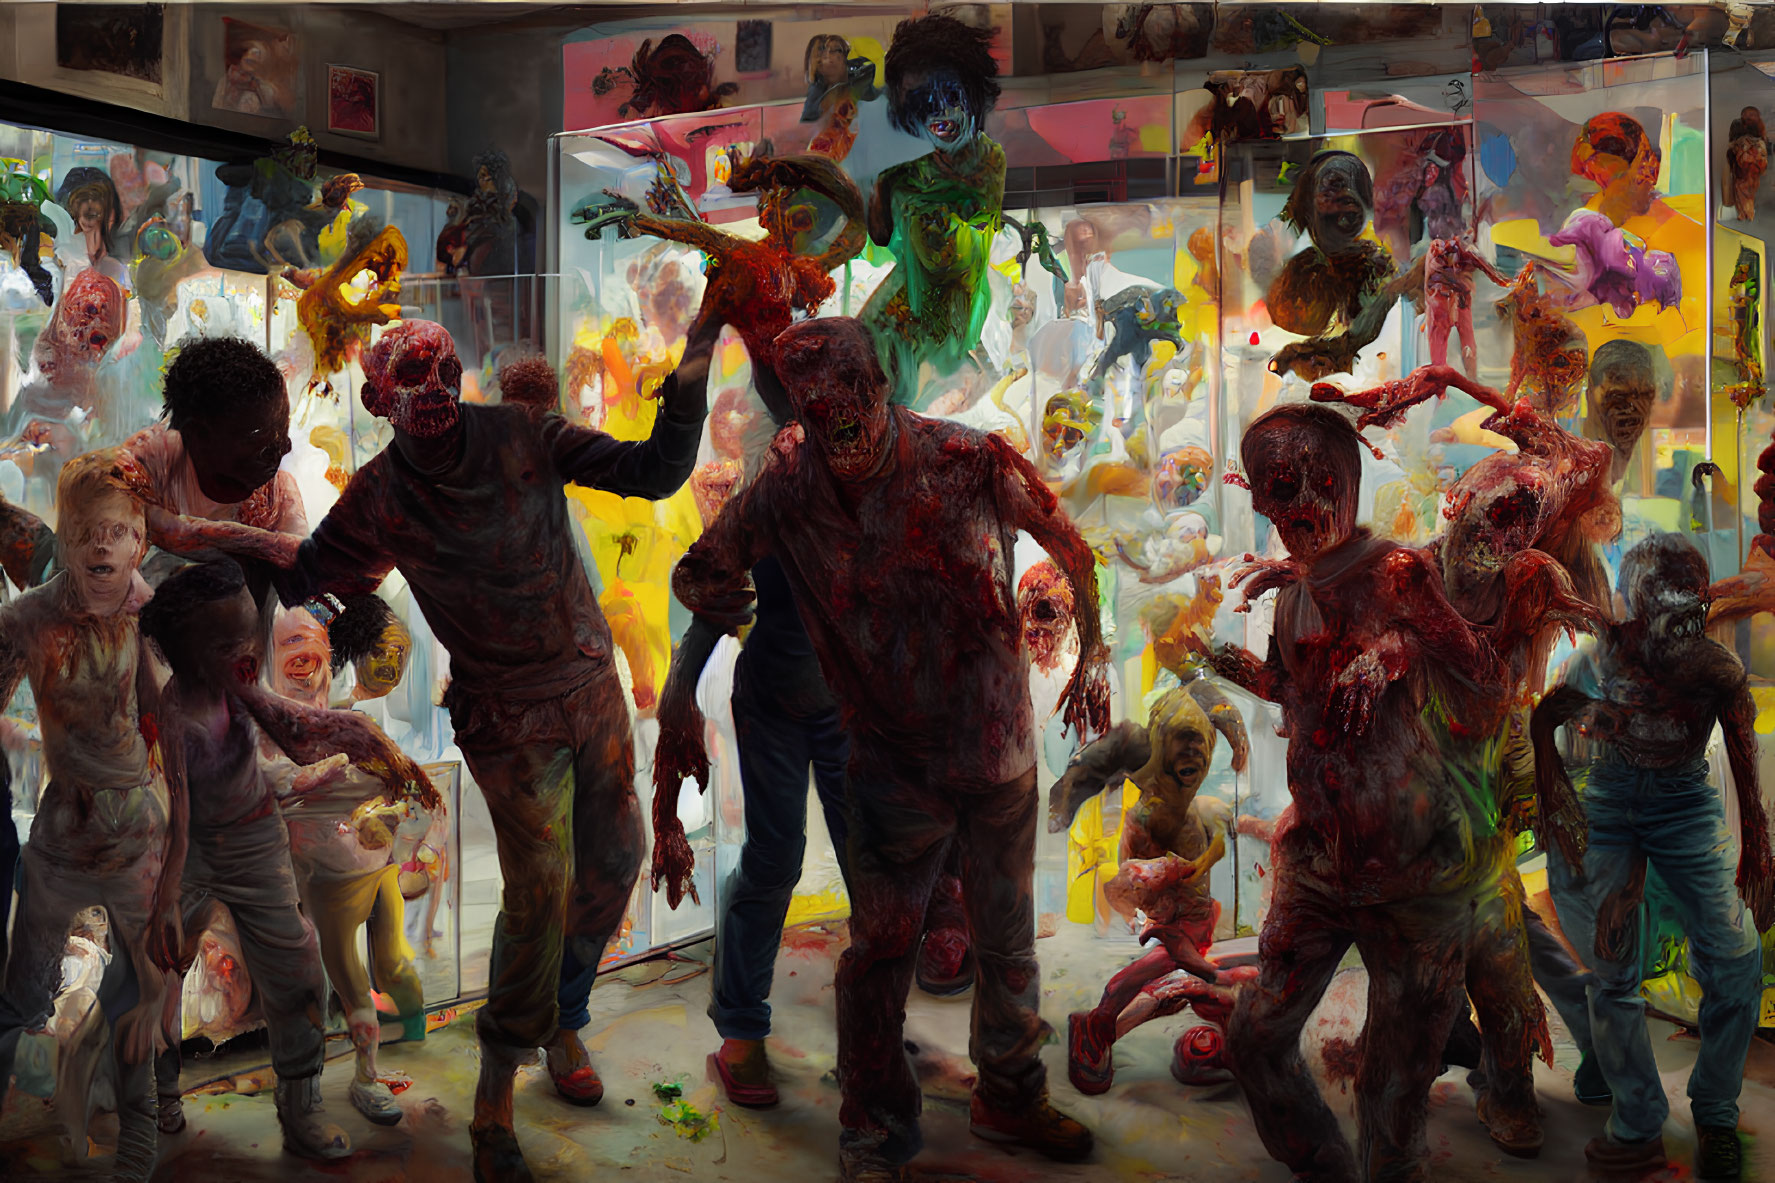 Colorful individuals covered in paint in chaotic scene